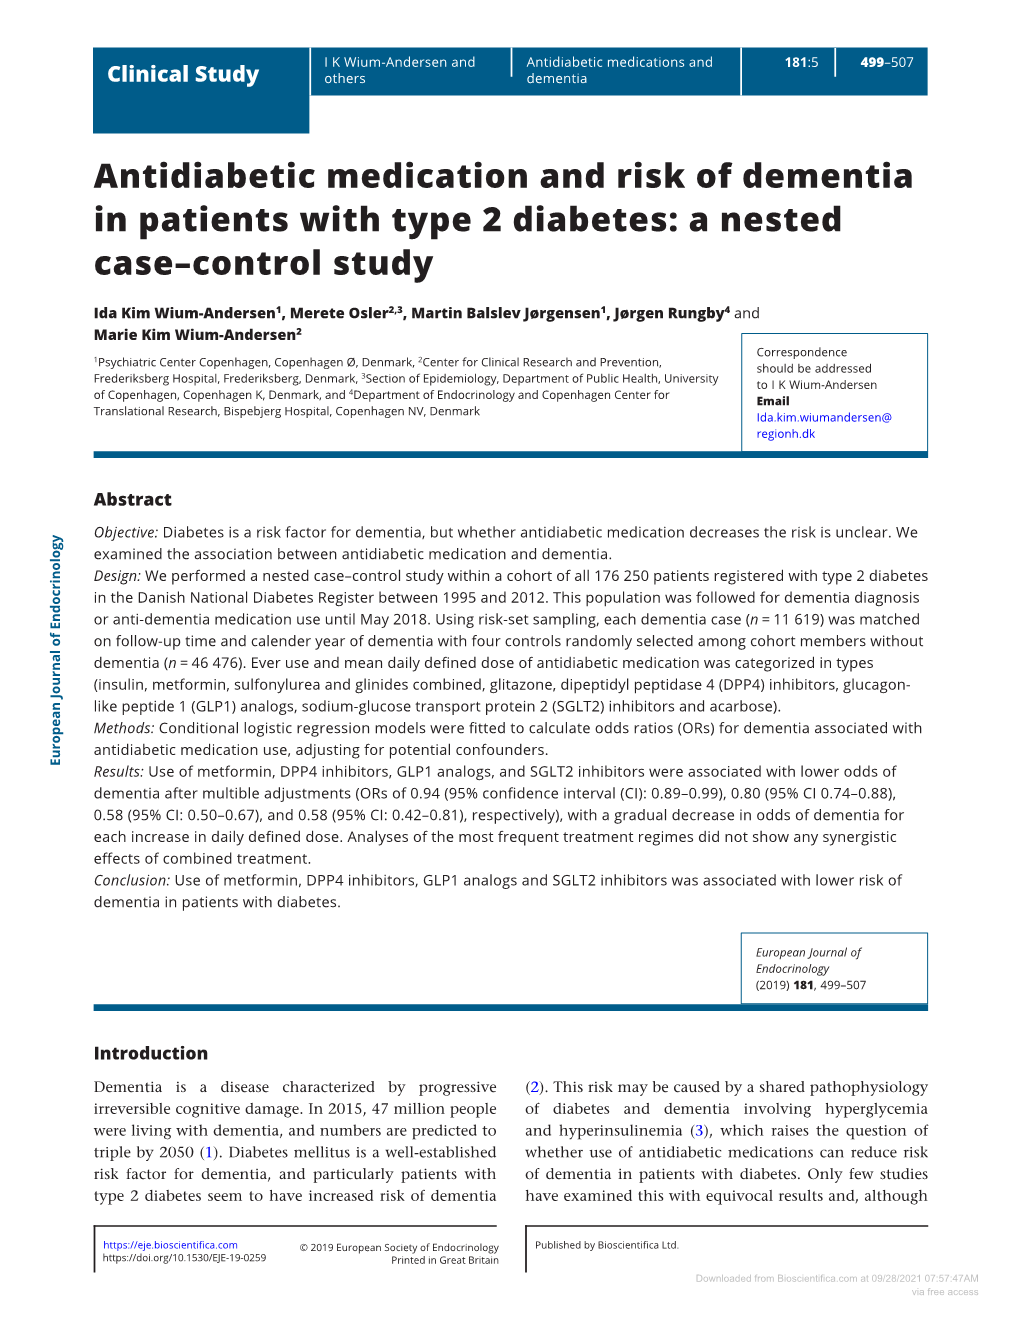 Antidiabetic Medication and Risk of Dementia in Patients with Type 2 Diabetes: a Nested Case–Control Study